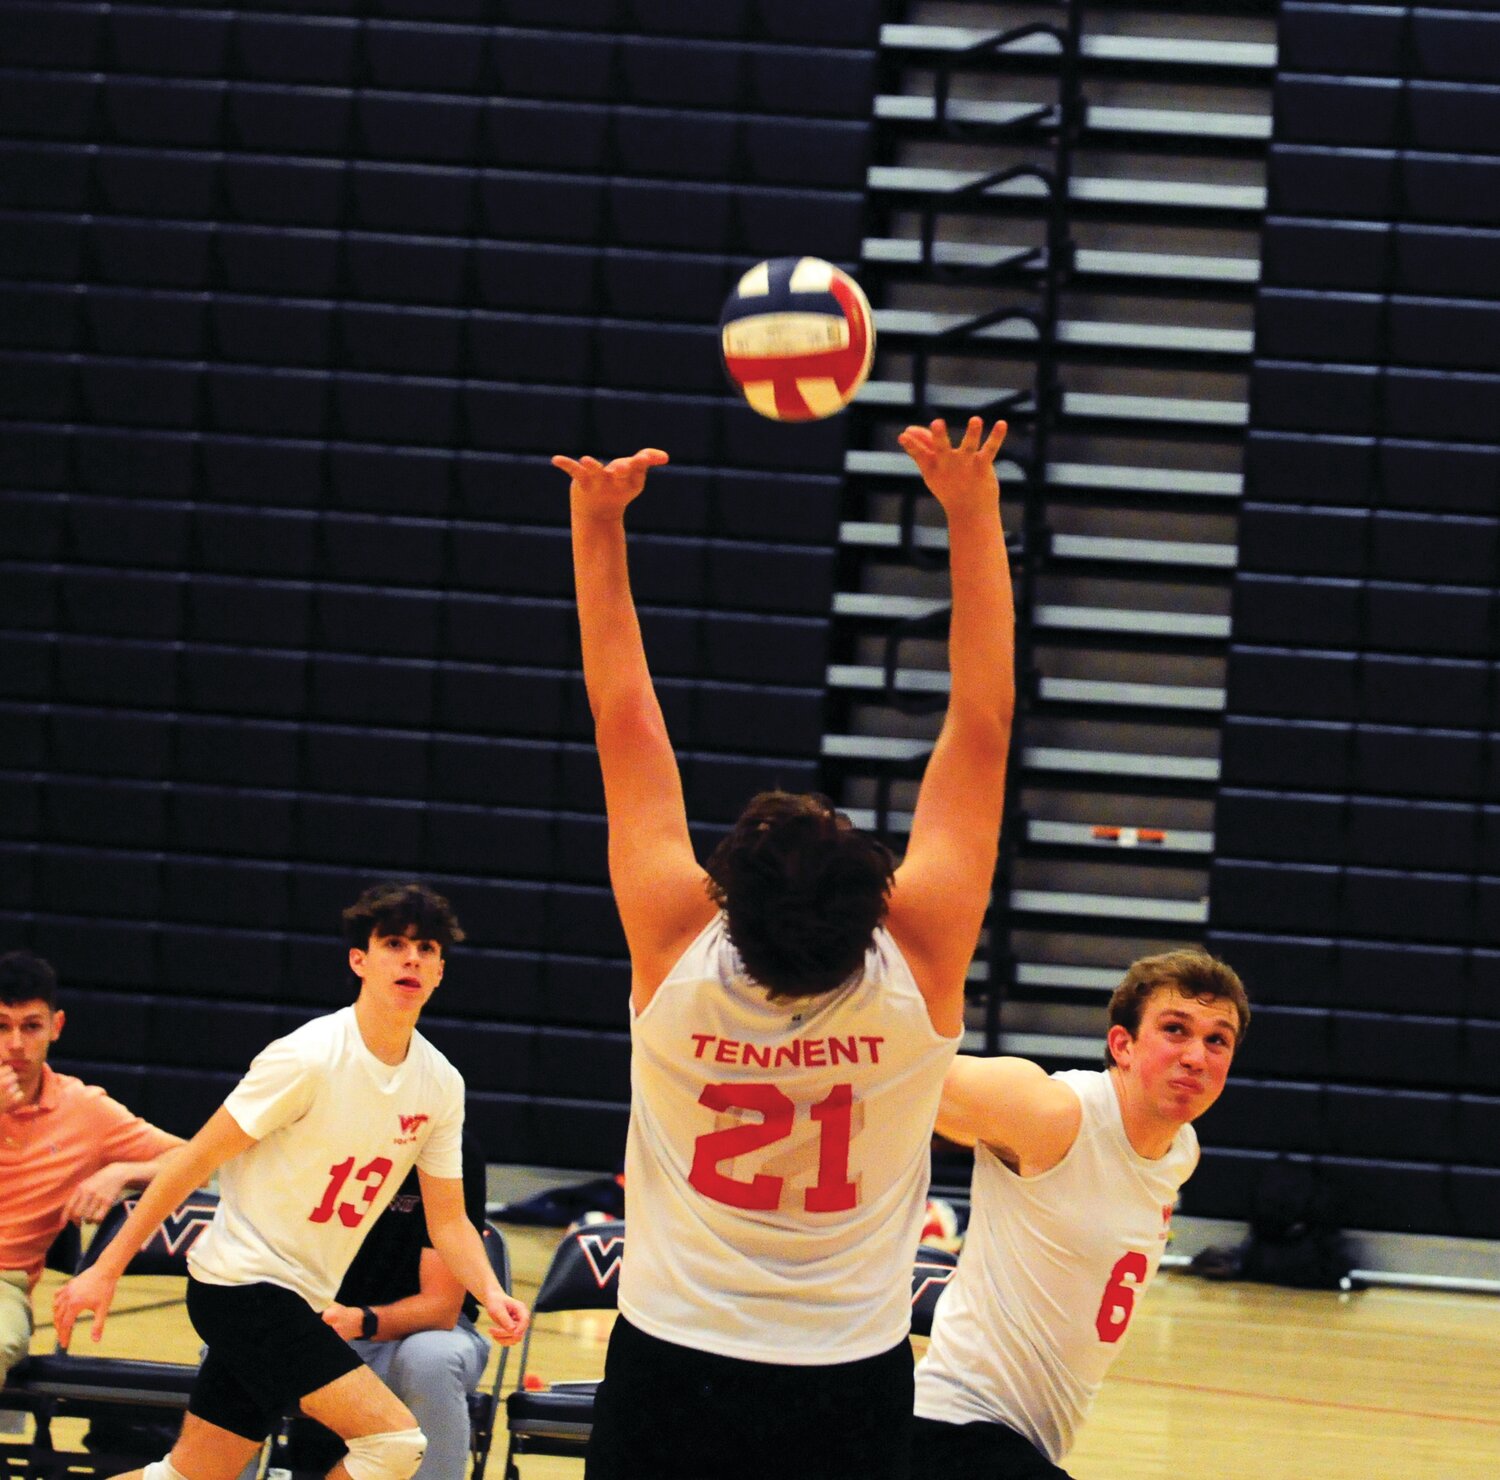 William Tennent’s Tristan Ziegler, 21, center, sets the ball in the Panthers’ recent Suburban One League matchup with Pennsbury. A.J. Cutillo, left, and Edwin Lurie, right, get set for the kill.